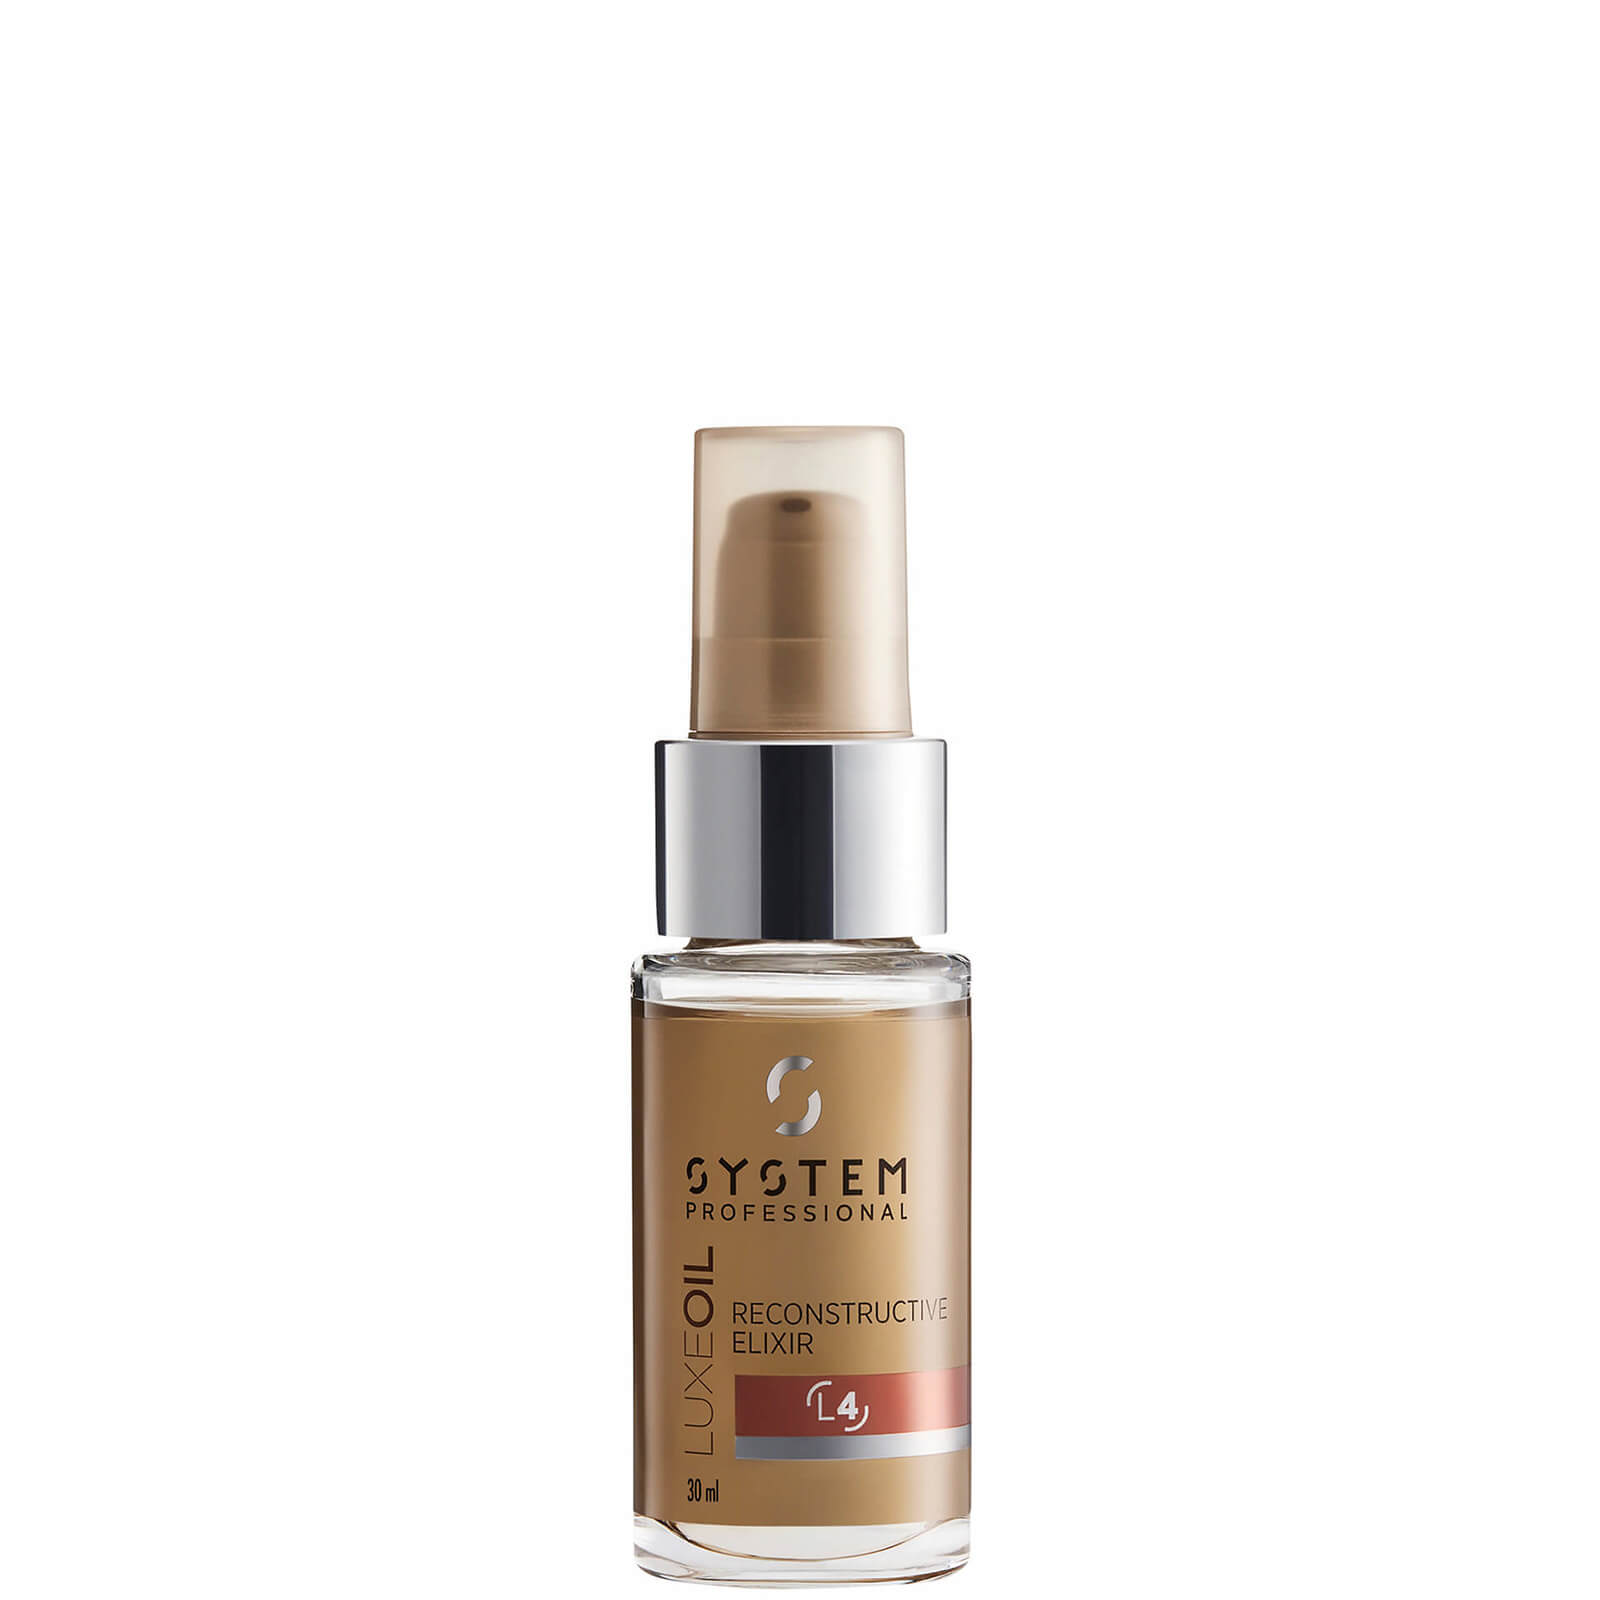 System Professional 秀发焕能修护液（小金瓶） 30ml In Brown